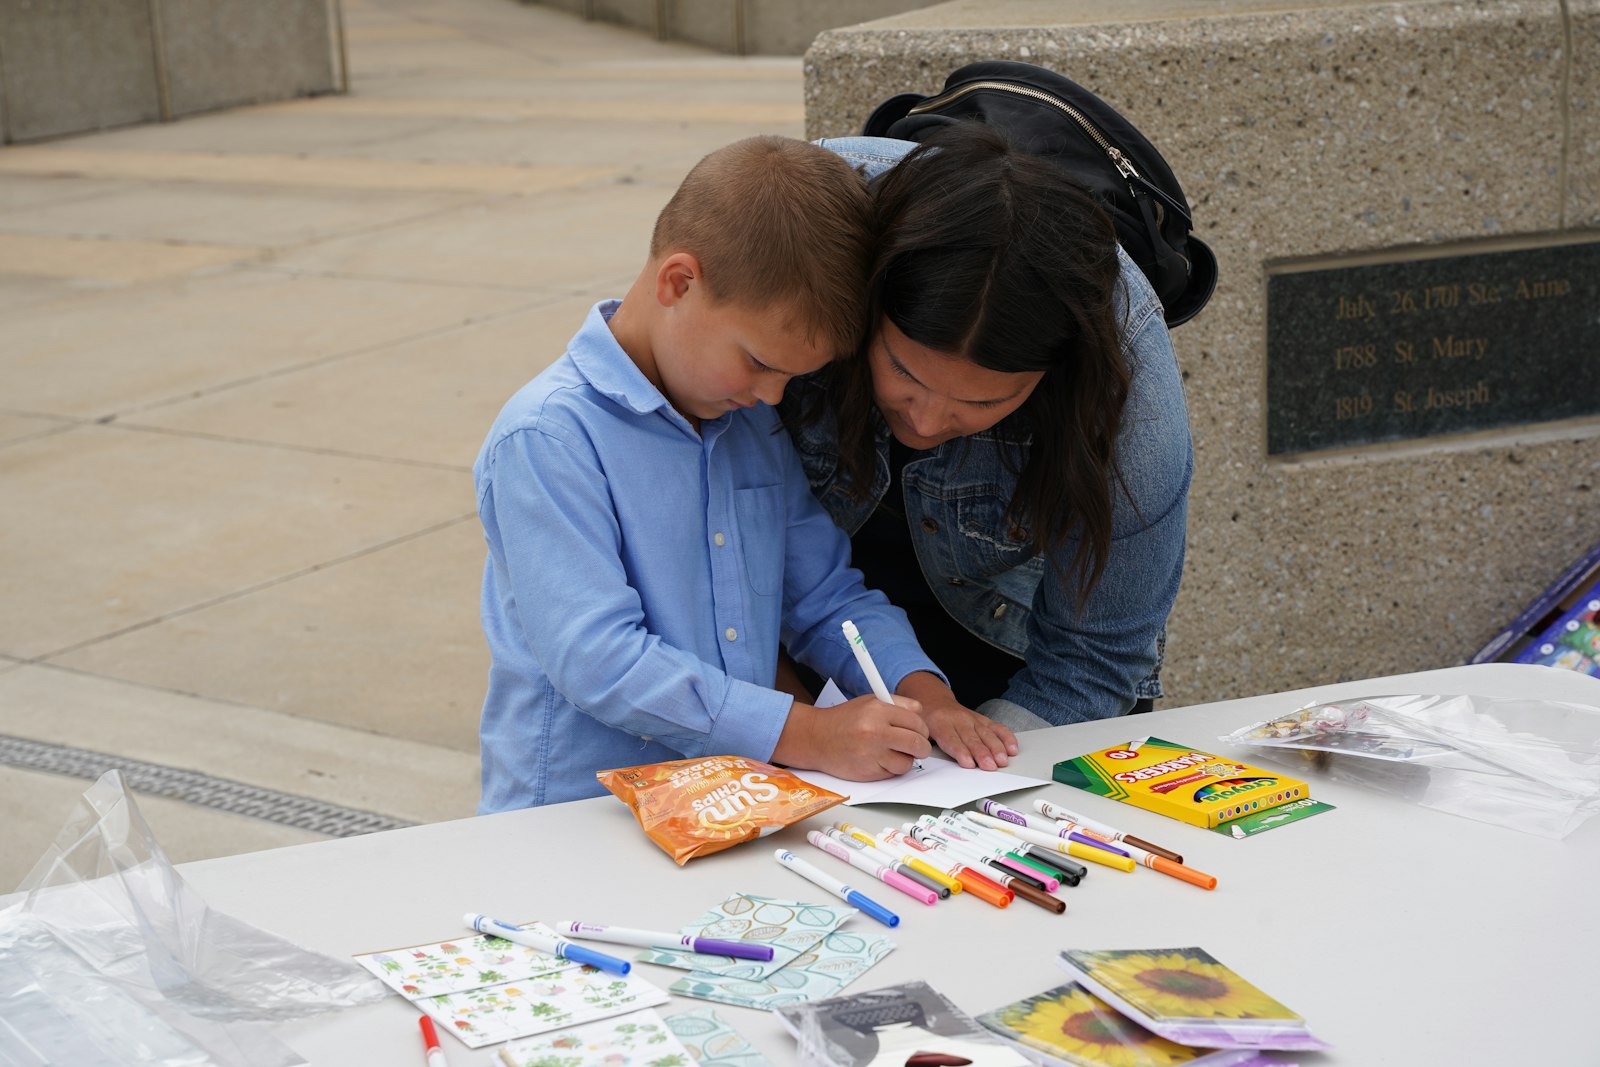 Jaime Taylor, a parishioner of Our Lady of the Lakes Parish in Waterford, helps her son, Ellis, make a card for local seniors during a service project after Mass at the Cathedral of the Most Blessed Sacrament.